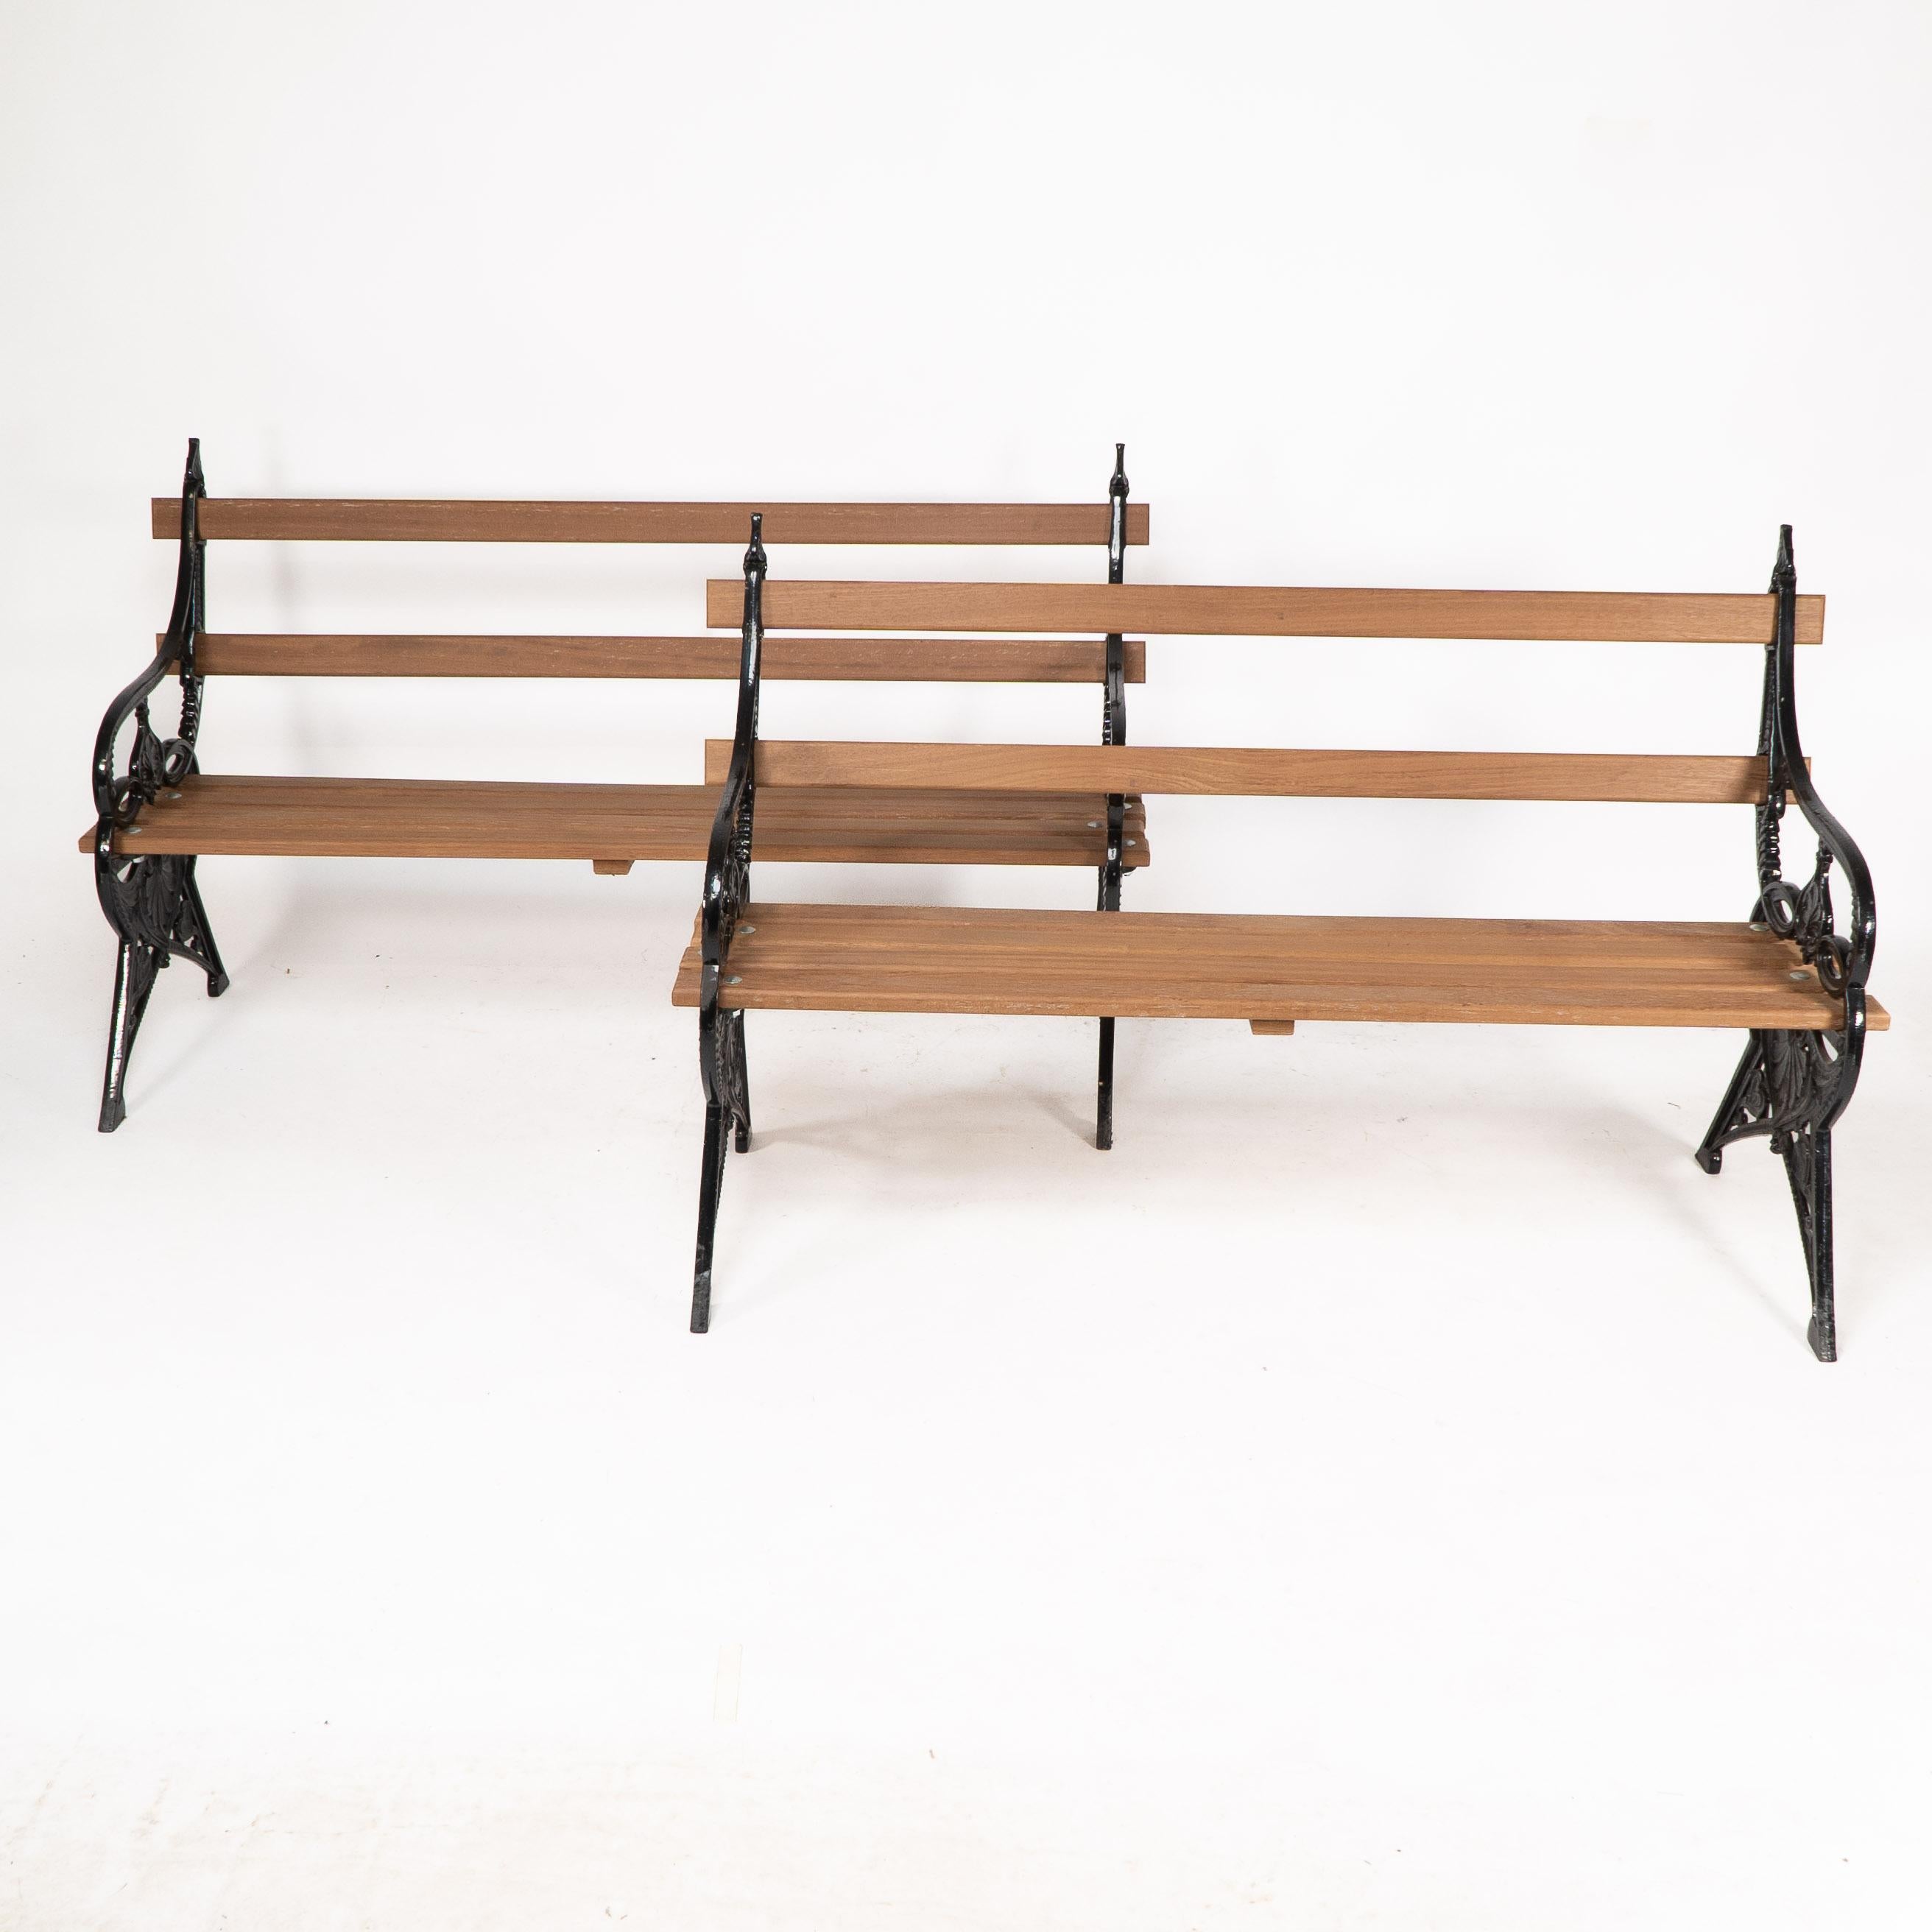 A pair of Aesthetic Movement cast iron garden benches, known as the Lily pad design, with fine fern leaf detailing, and smaller Lily-style leaves to the angular legs.Price per benchCoalbrookdale Iron Works and Foundry, Shropshire England, was one of